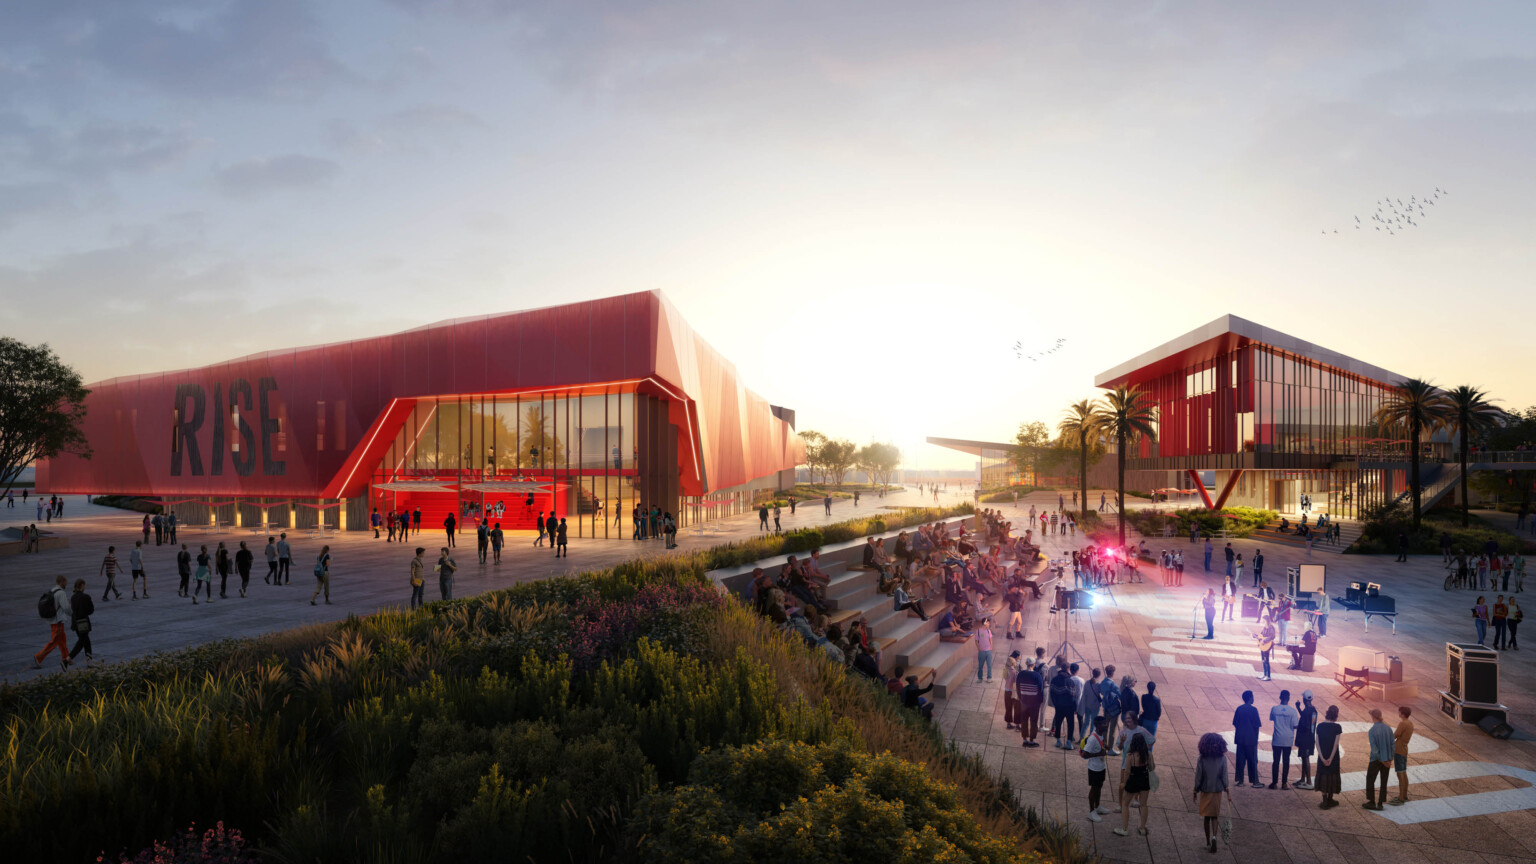 design concept for new high school in Compton showing steps leading up to multi-building campus; red metal façade and large windows create school identity